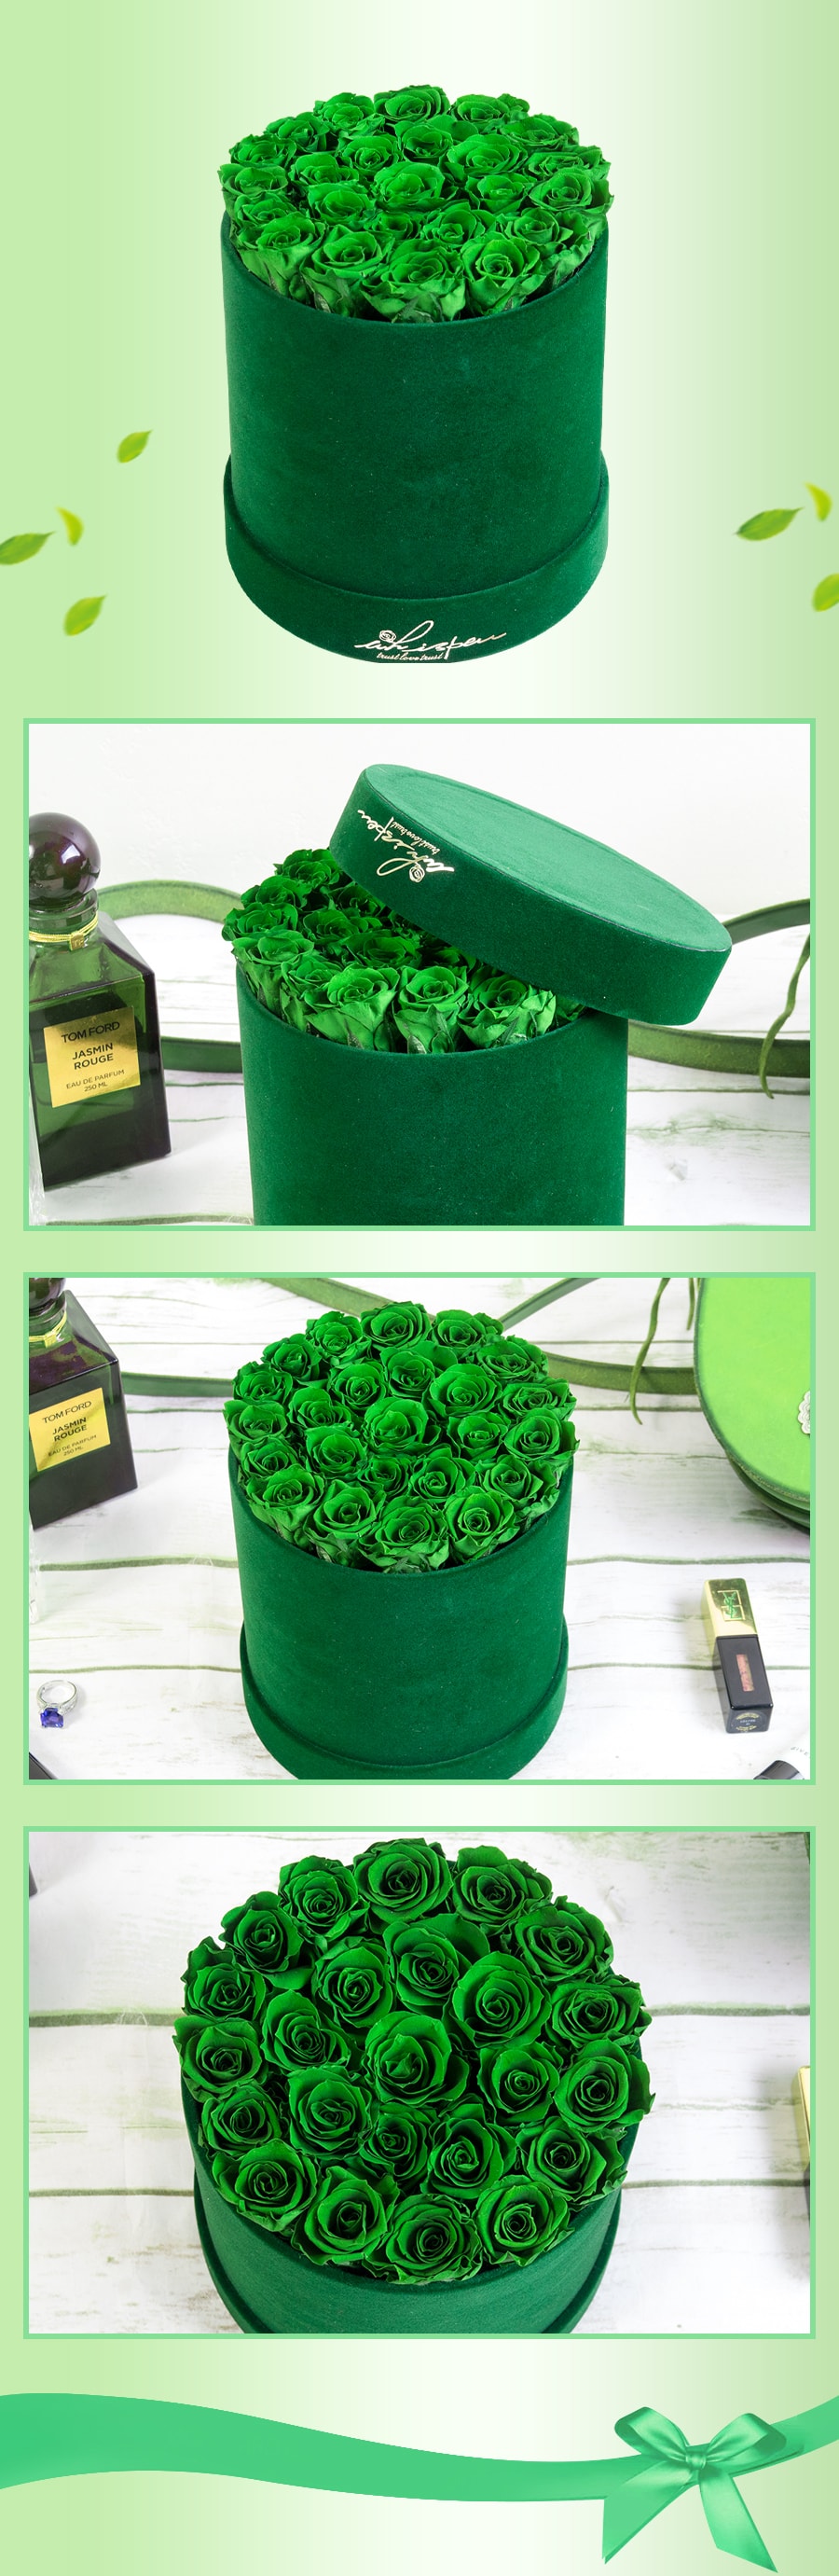 whisper bouquet preserved roses Emerald round box (emerald roses)